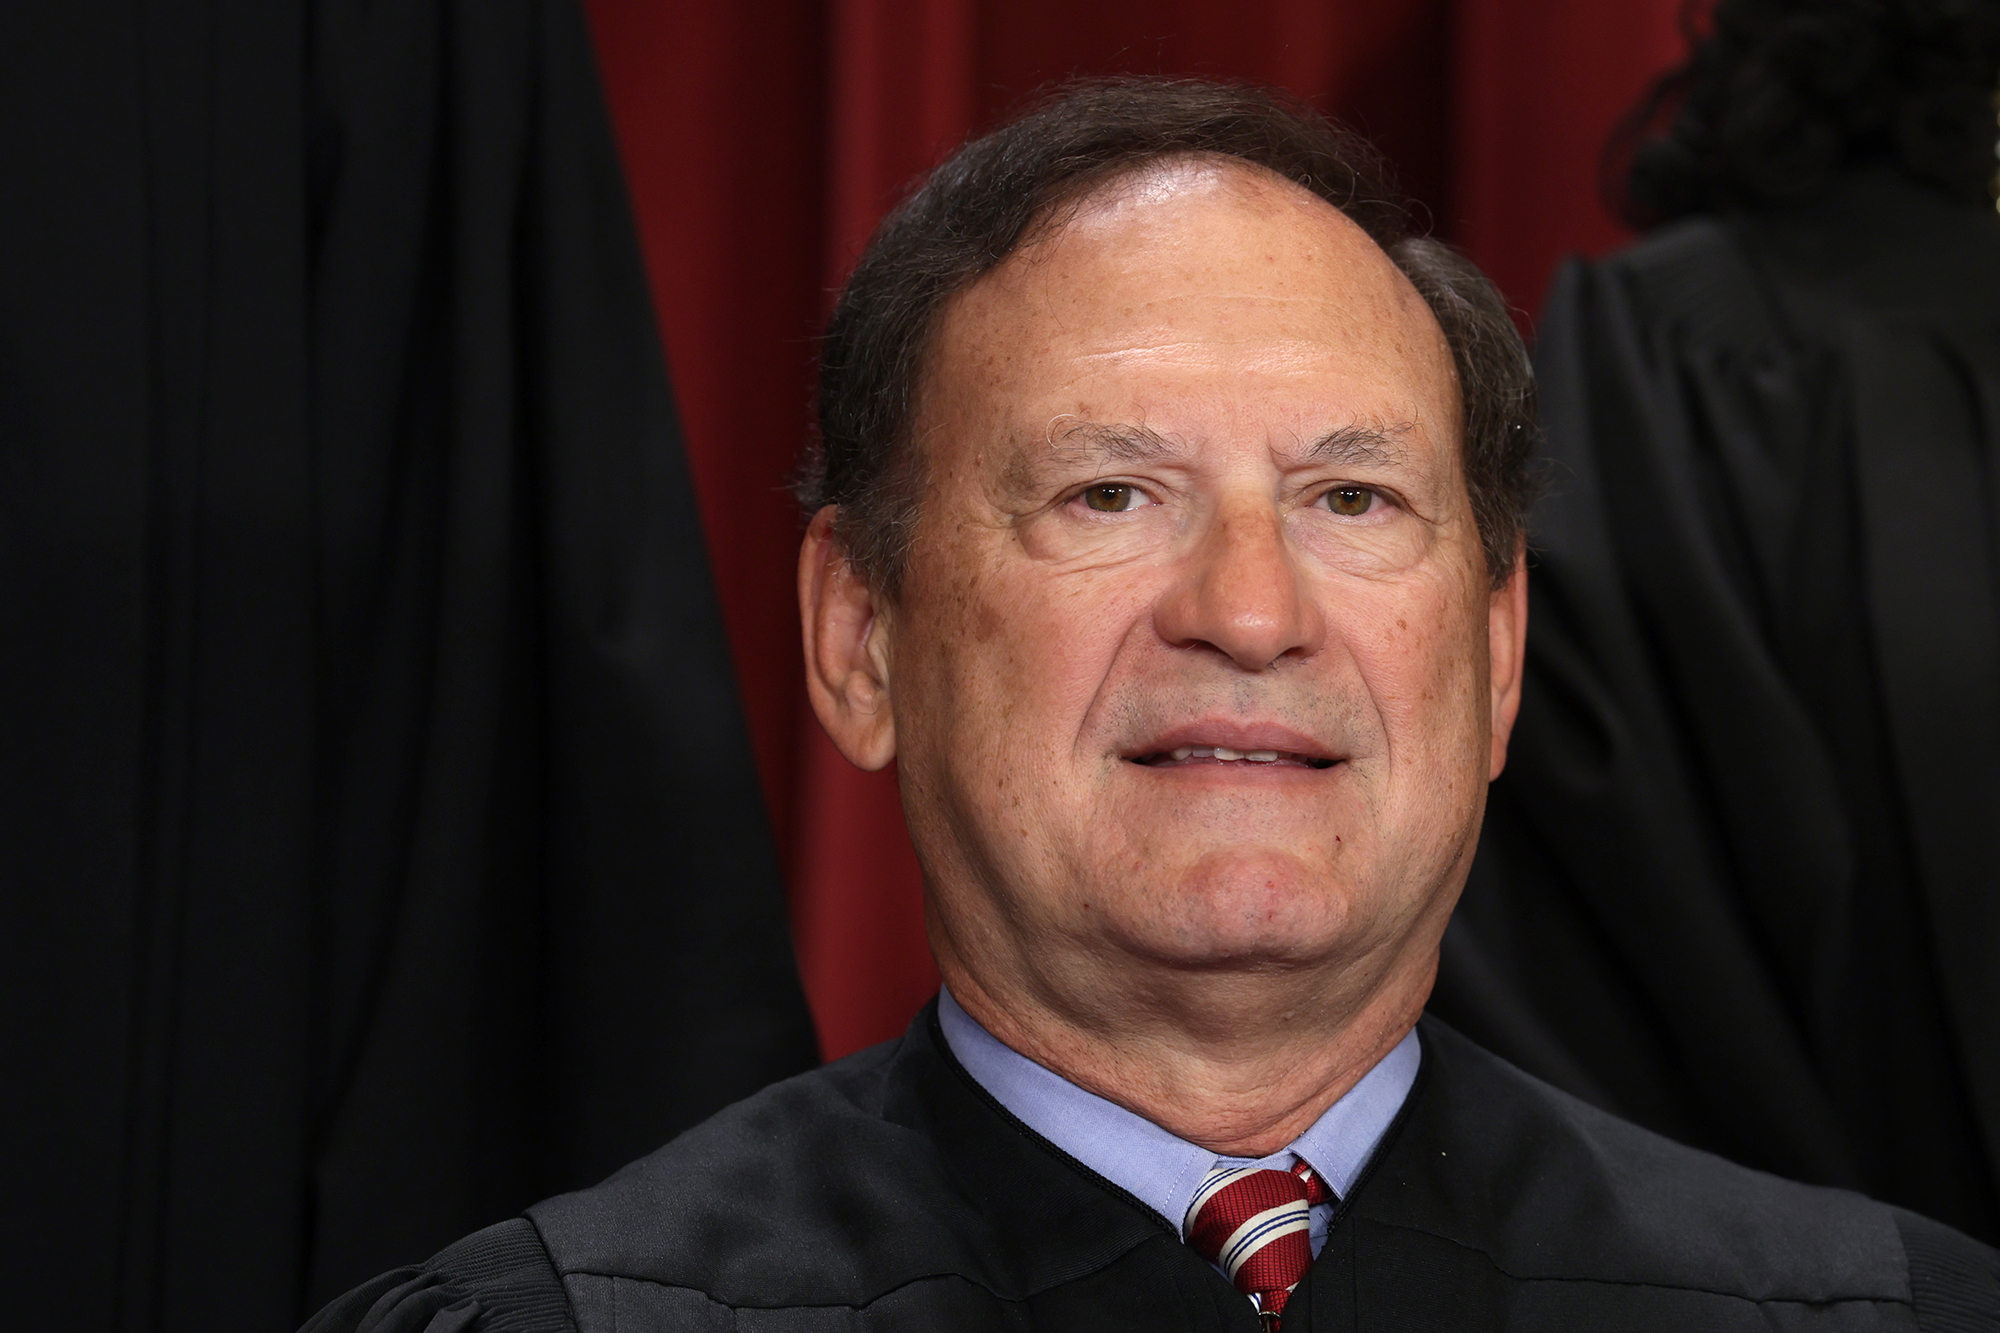 United States Supreme Court Associate Justice Samuel Alito poses for an official portrait at the East Conference Room of the Supreme Court building on October 7, 2022 in Washington, DC. 